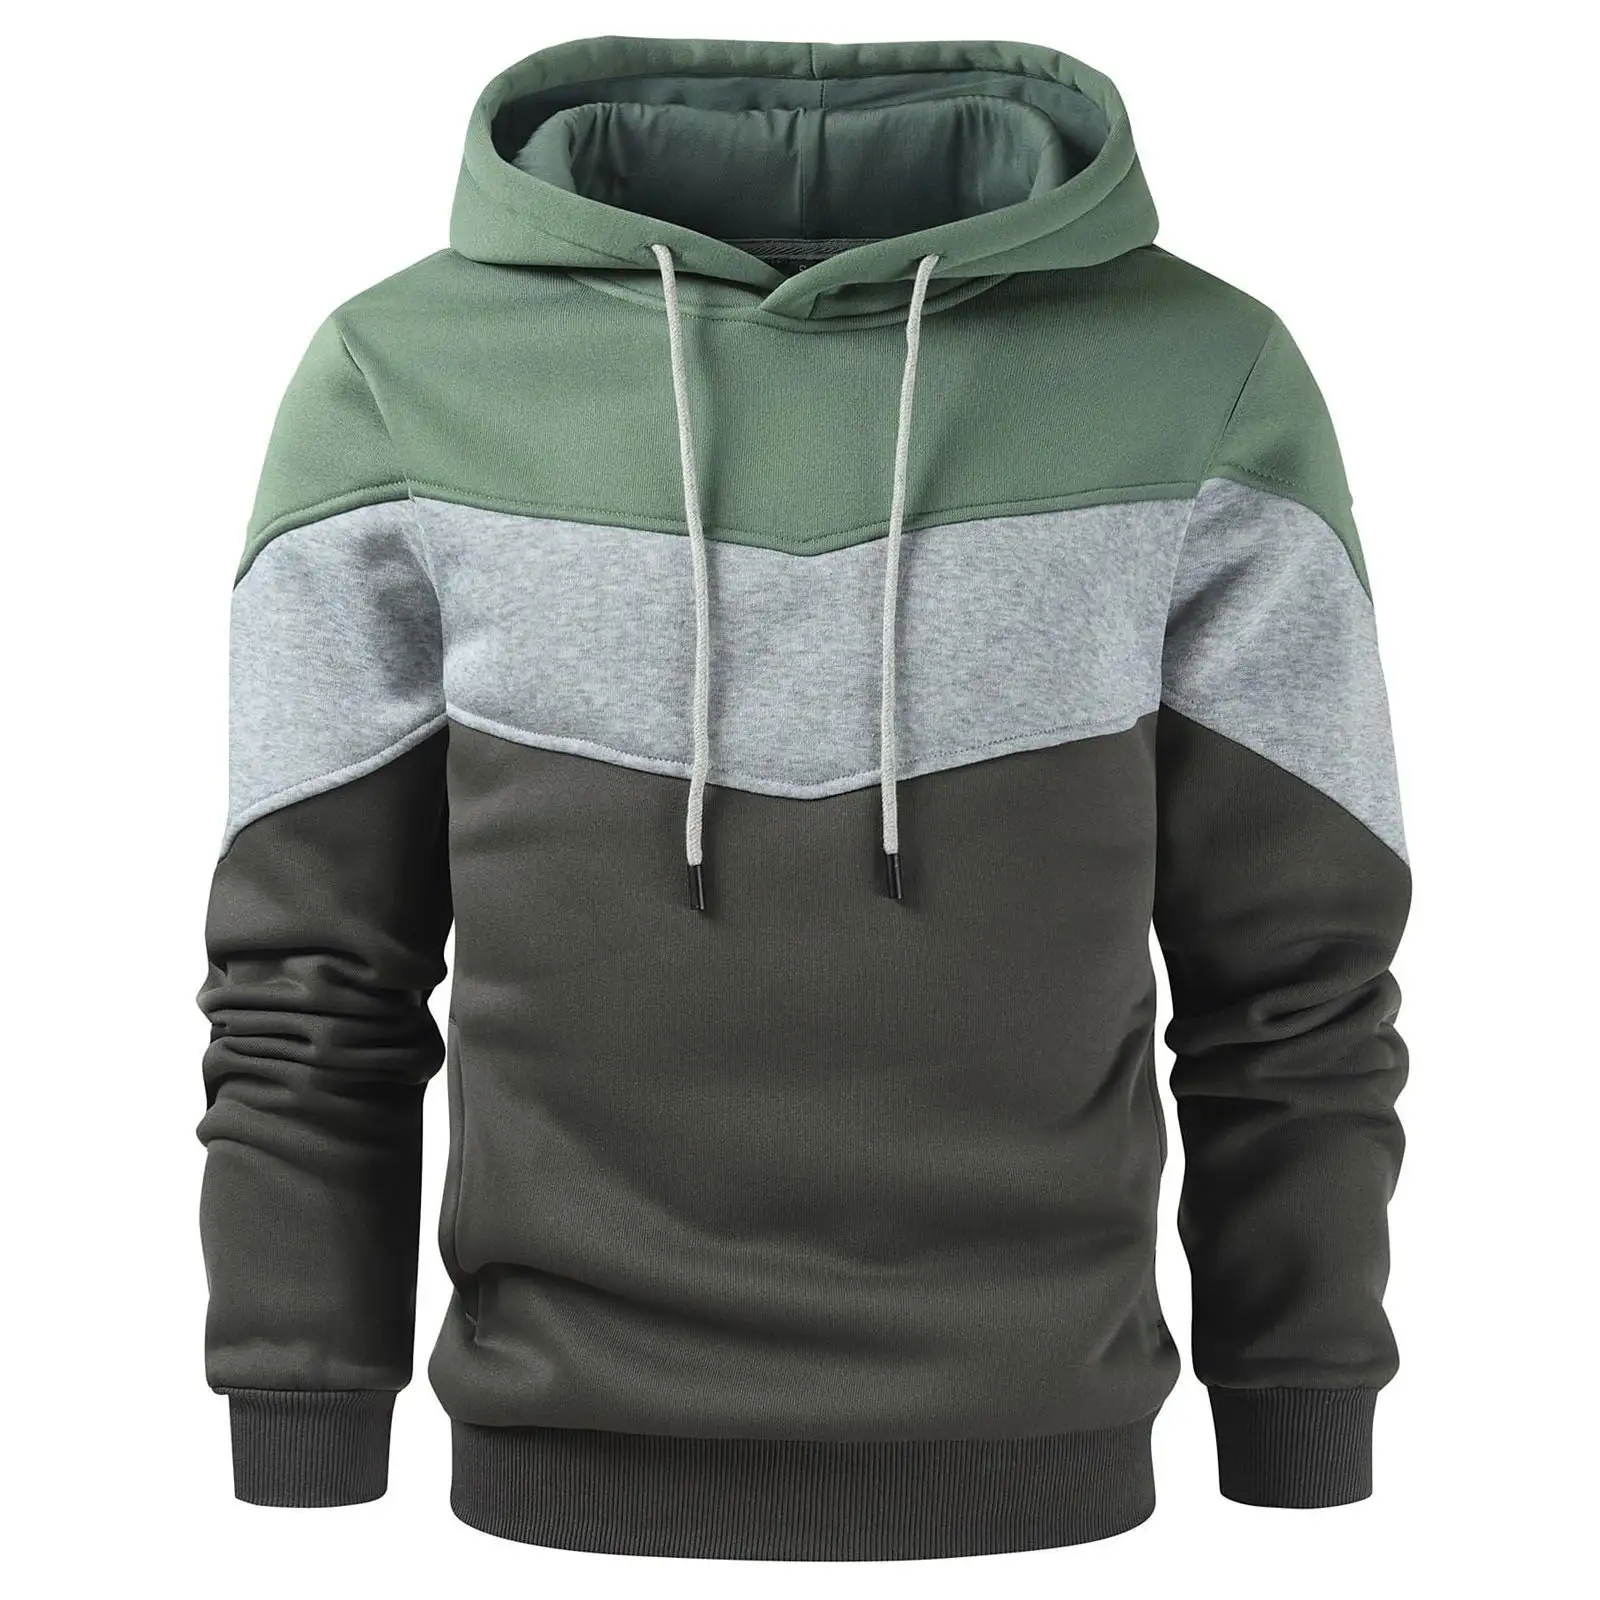 OEM Manufacture High Quality Multi Color Hoodie Fashion Hoodie Made By Star Figure Enterprises ( PayPal Verified )